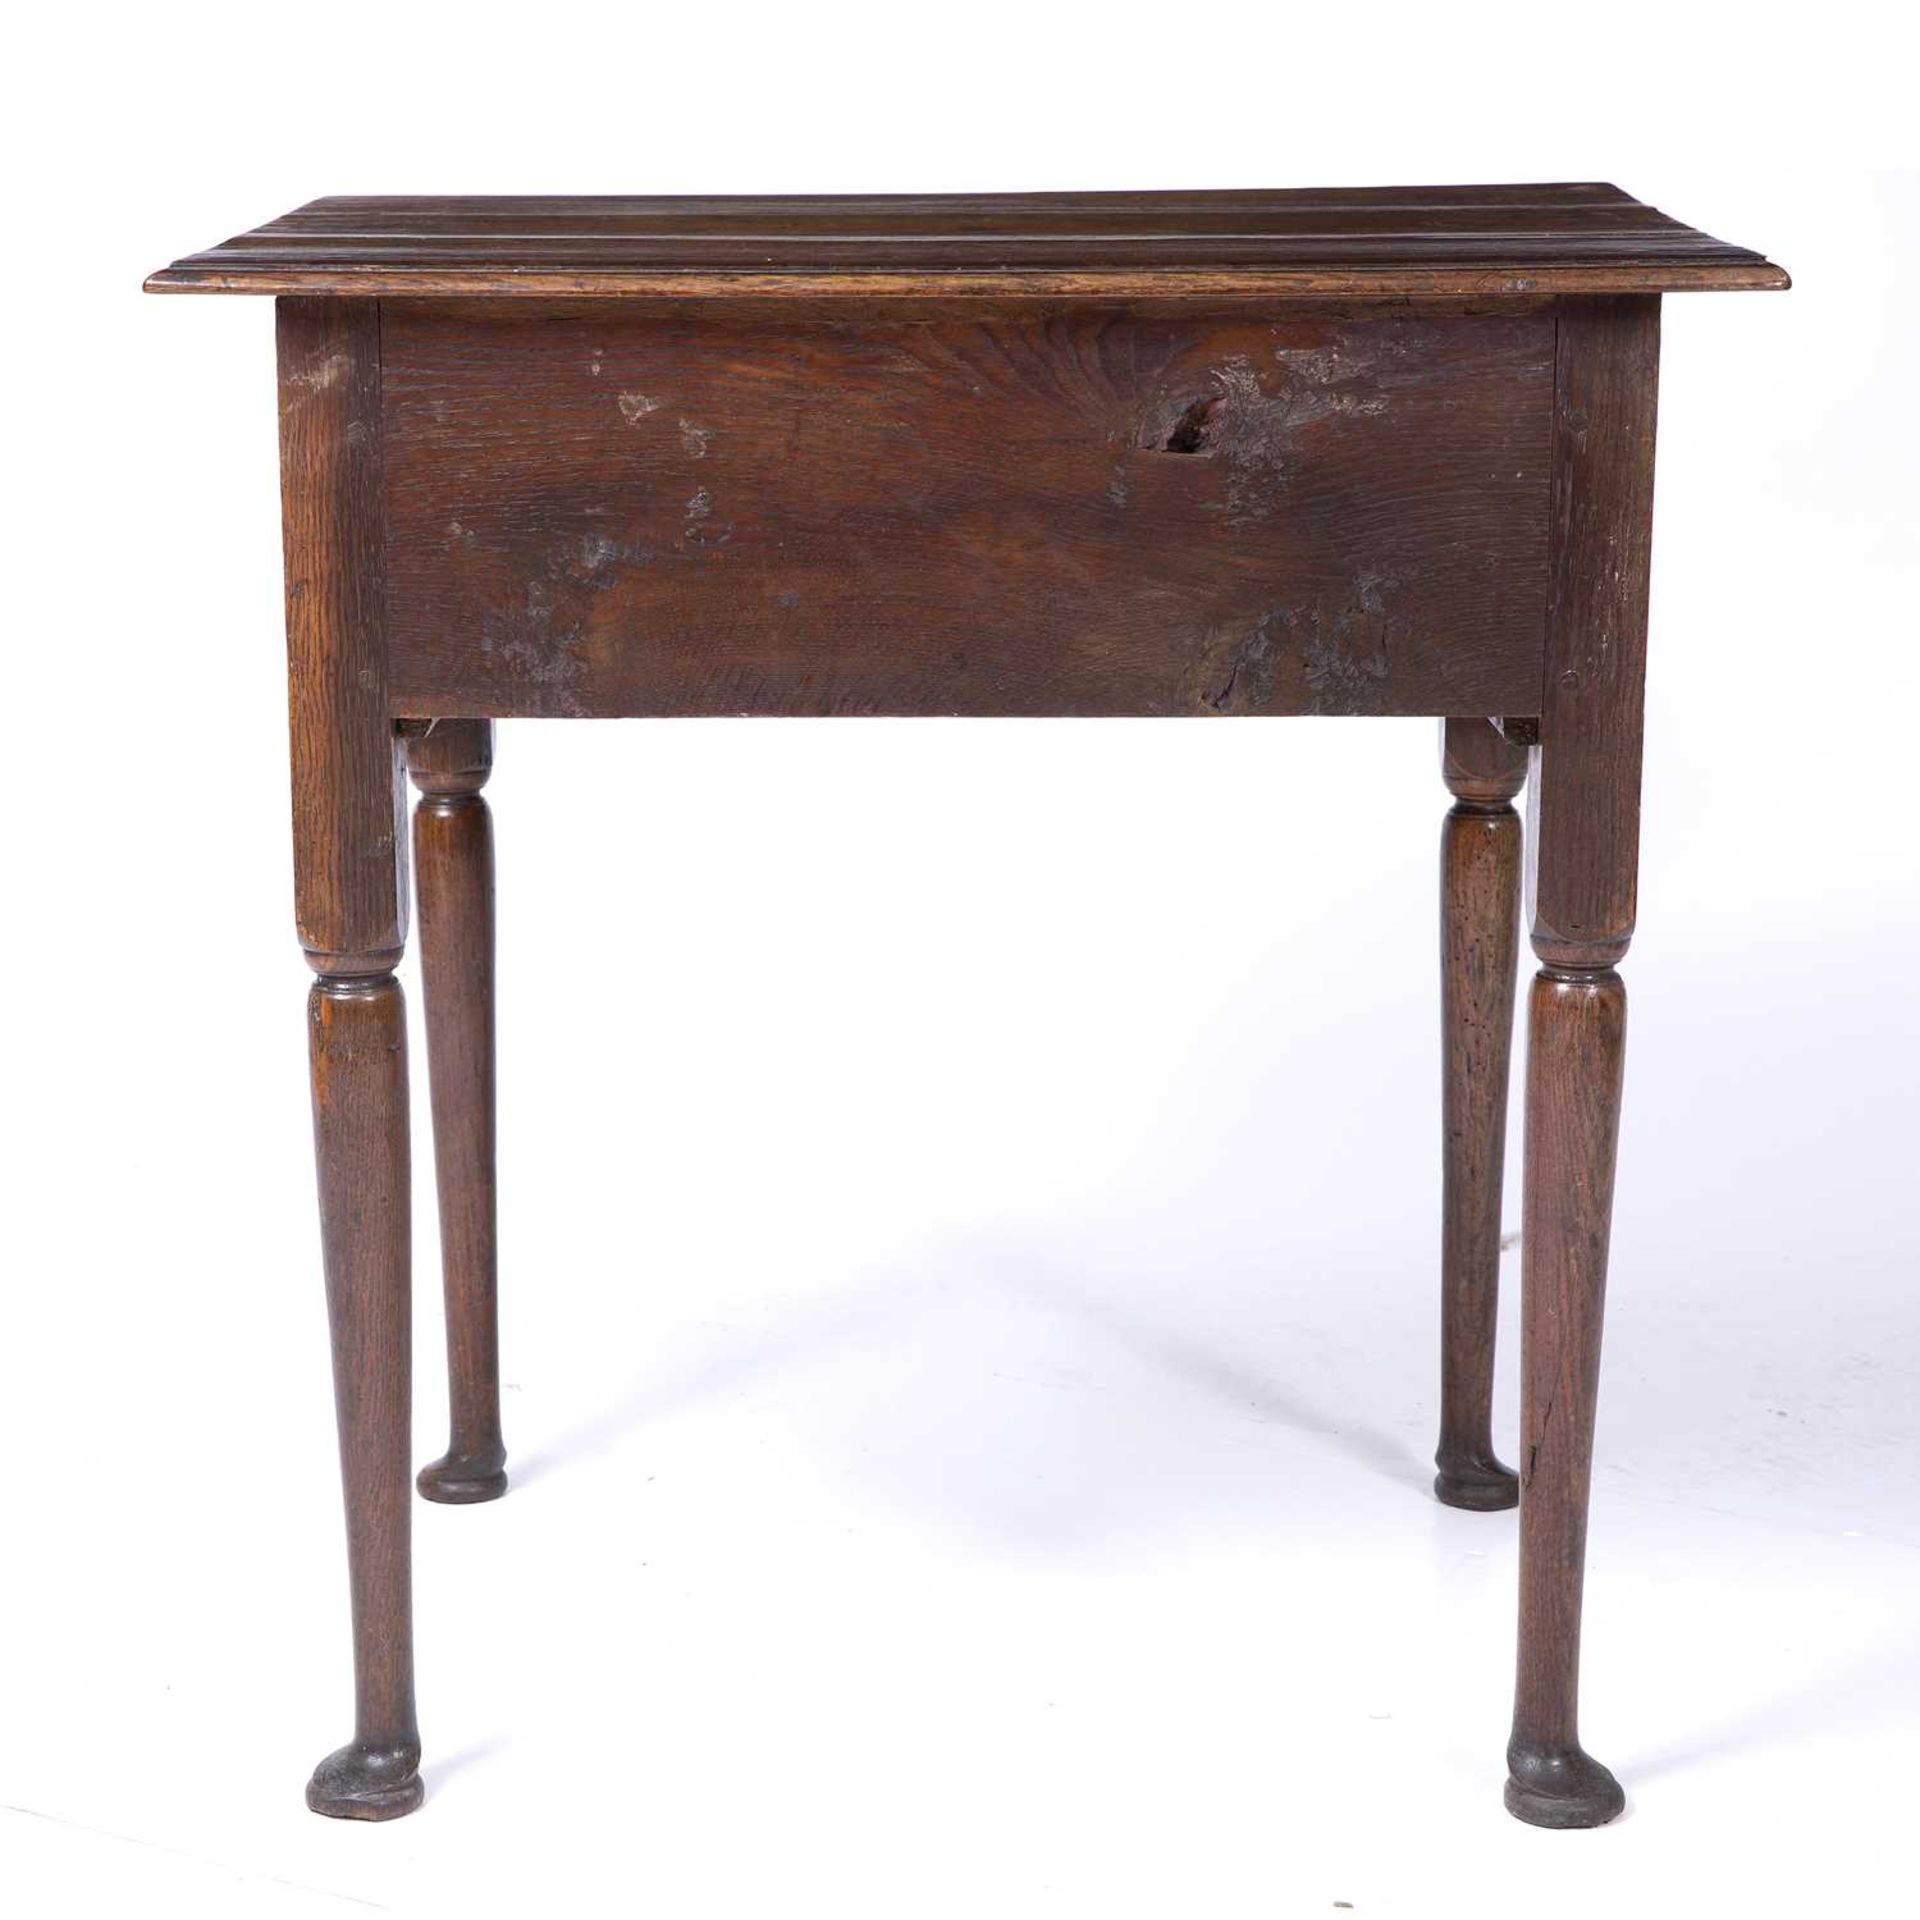 An 18th century oak low boy with three drawers and bras handles raised on turned legs and pad - Image 5 of 6